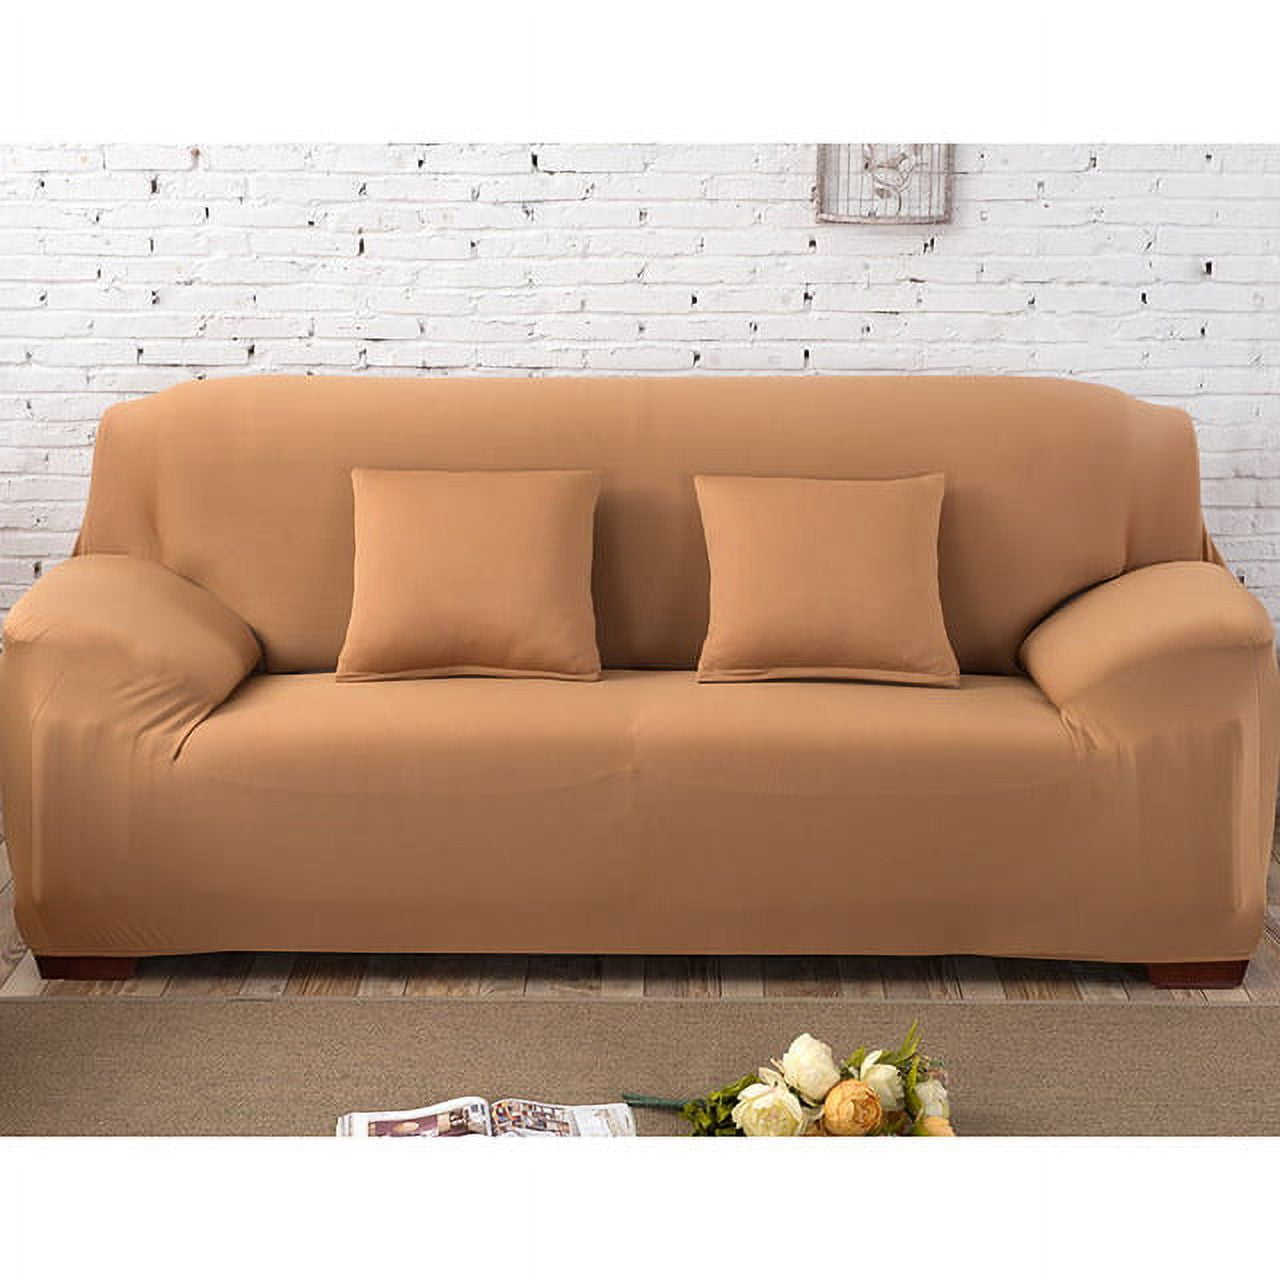 Dyiom Stretch Chair Sofa Slipcover 1-Piece Couch Sofa Cover Furniture Protector Soft with Elastic Bottom Chair, Coffee, Brown